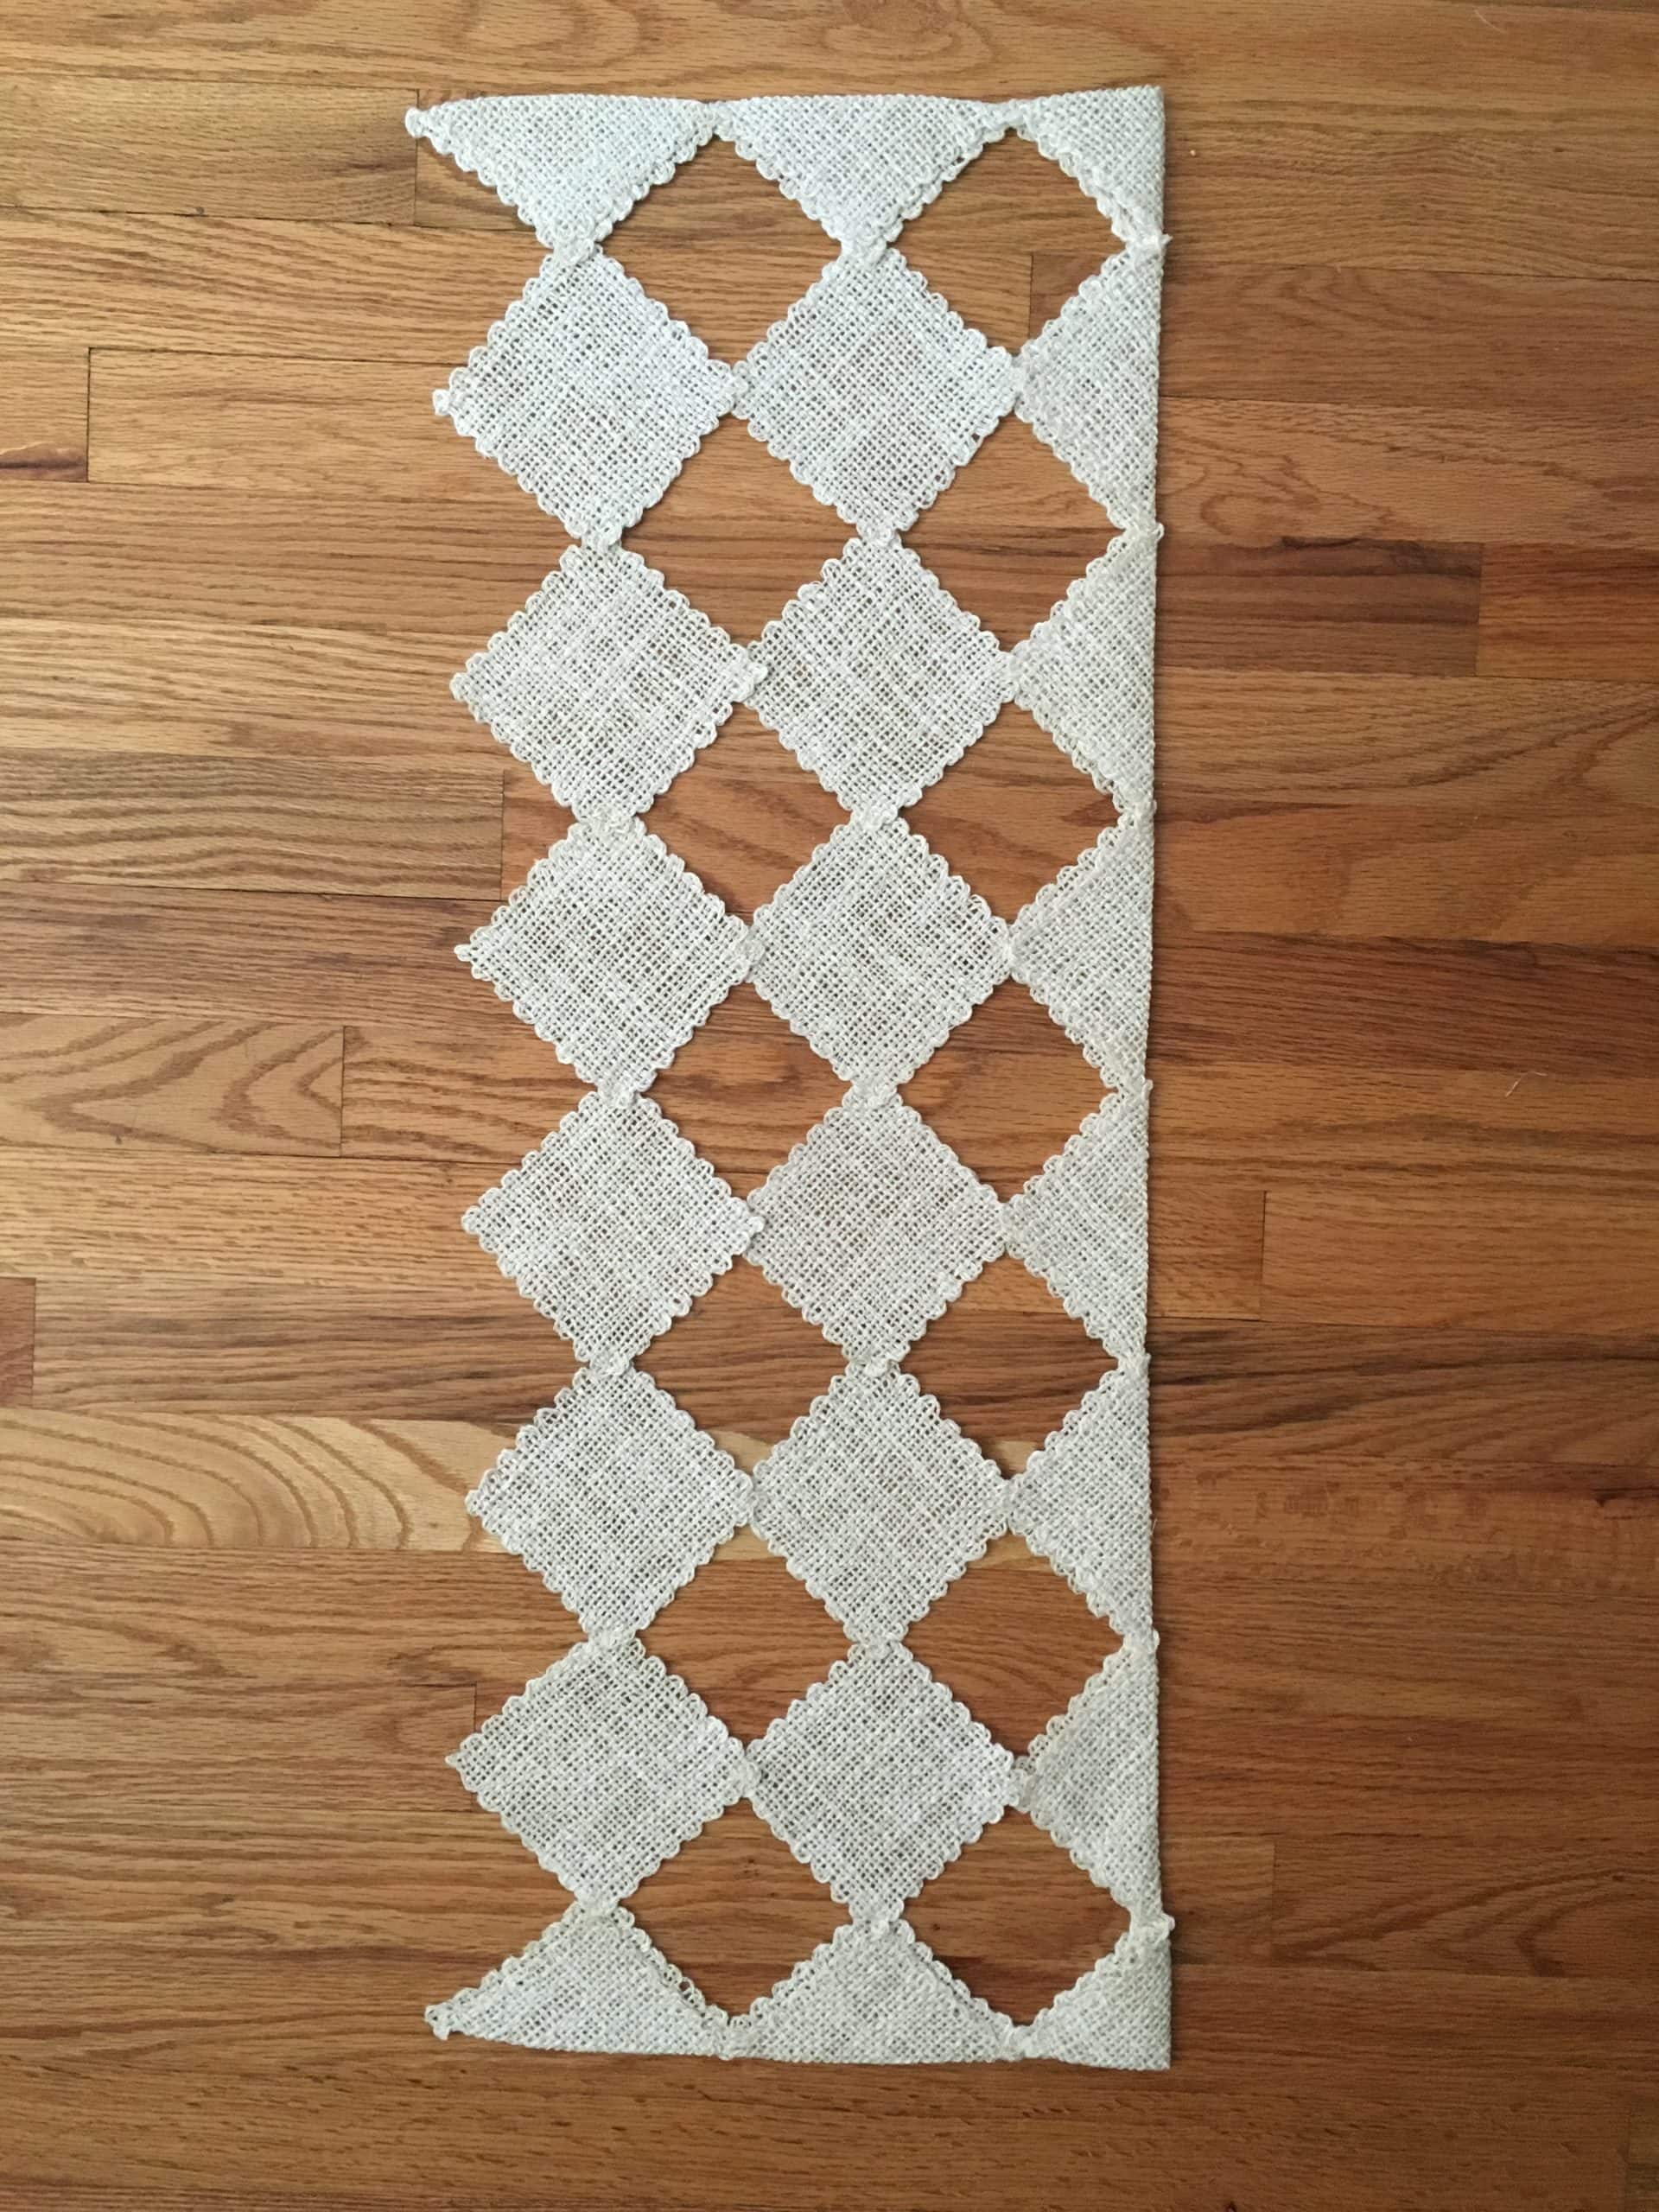 Image of When the edges are complete, fold over the top squares...